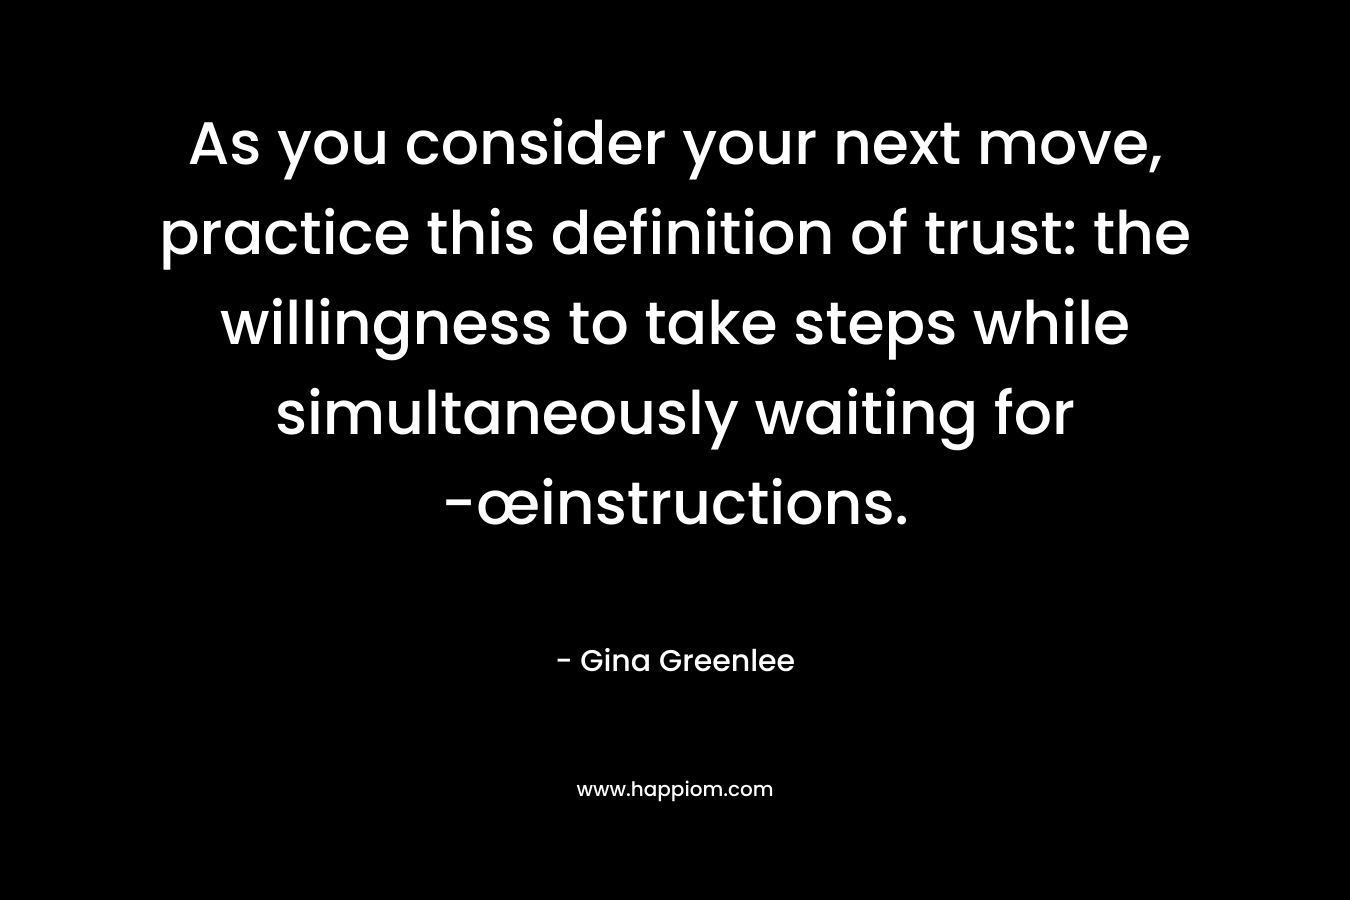 As you consider your next move, practice this definition of trust: the willingness to take steps while simultaneously waiting for -œinstructions. – Gina Greenlee